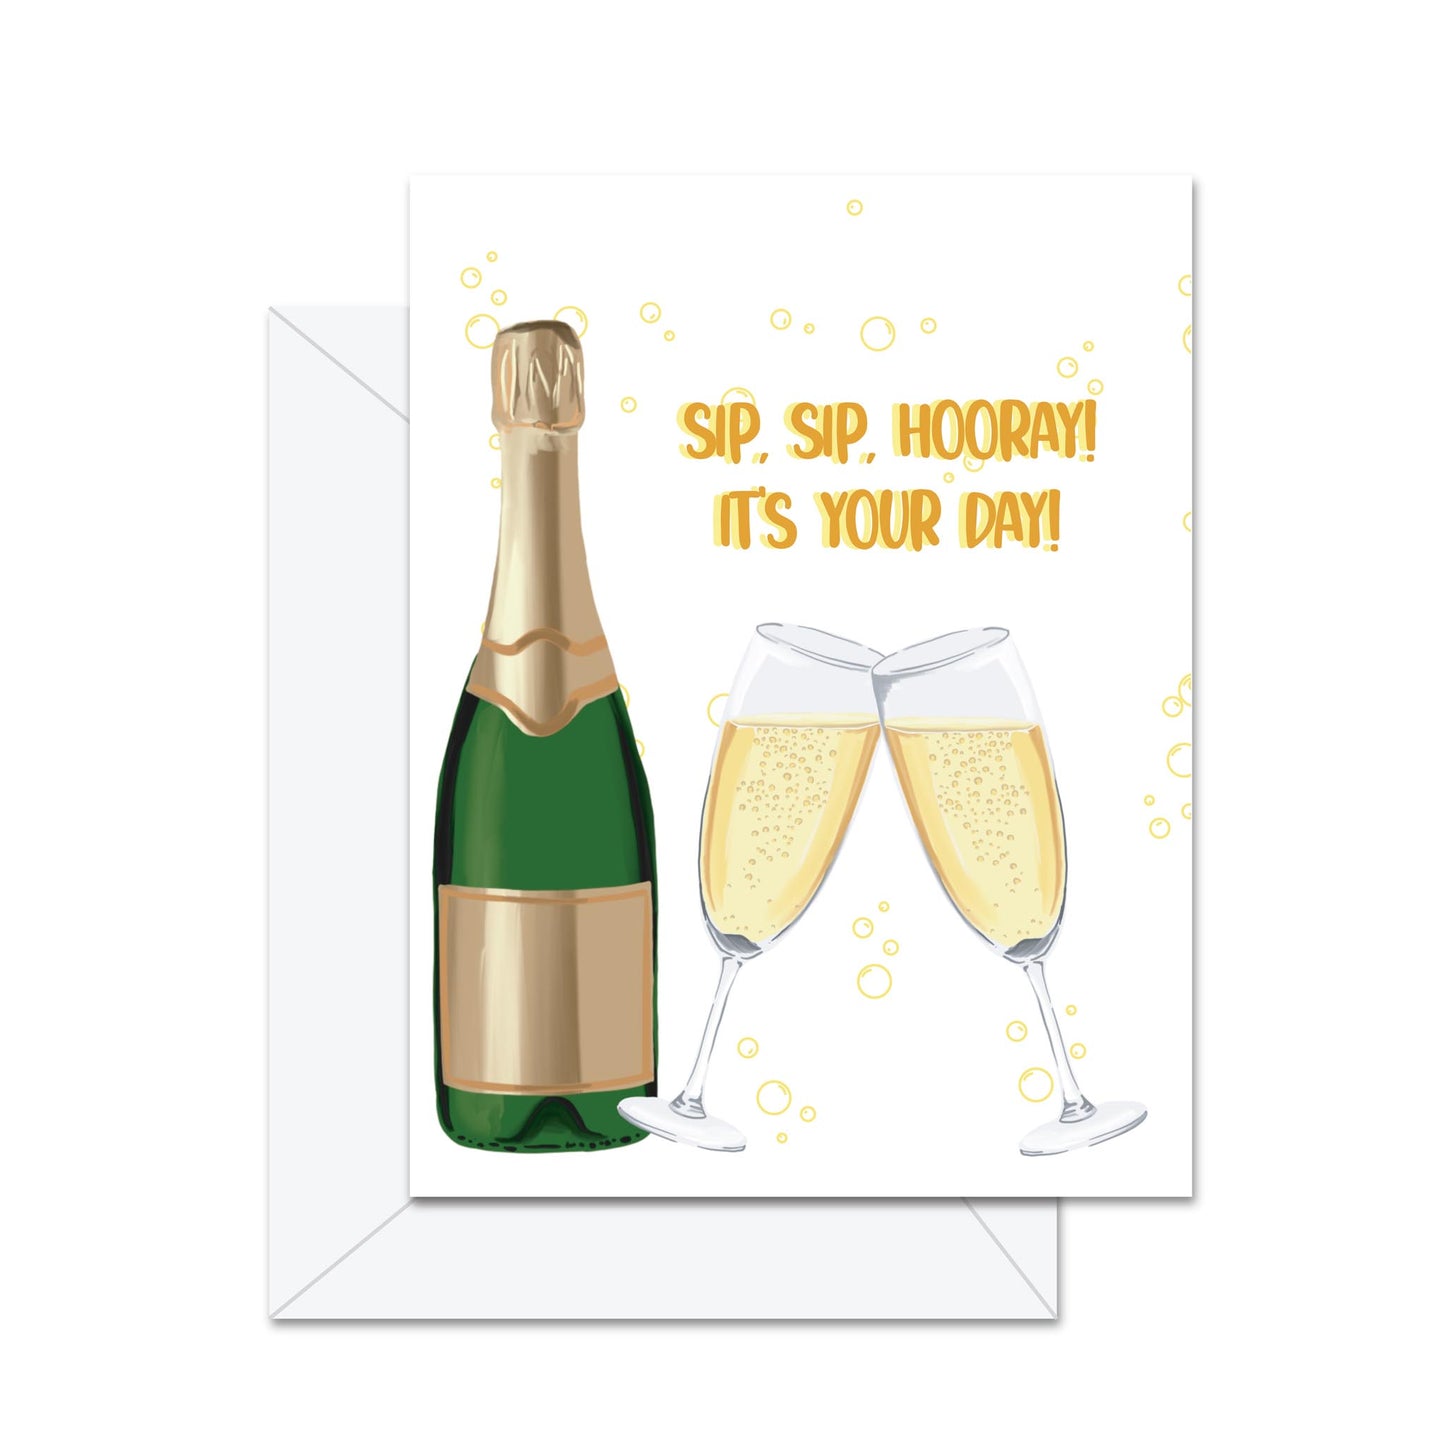 Sip, Sip, Hooray! It's Your Day! Greeting Card